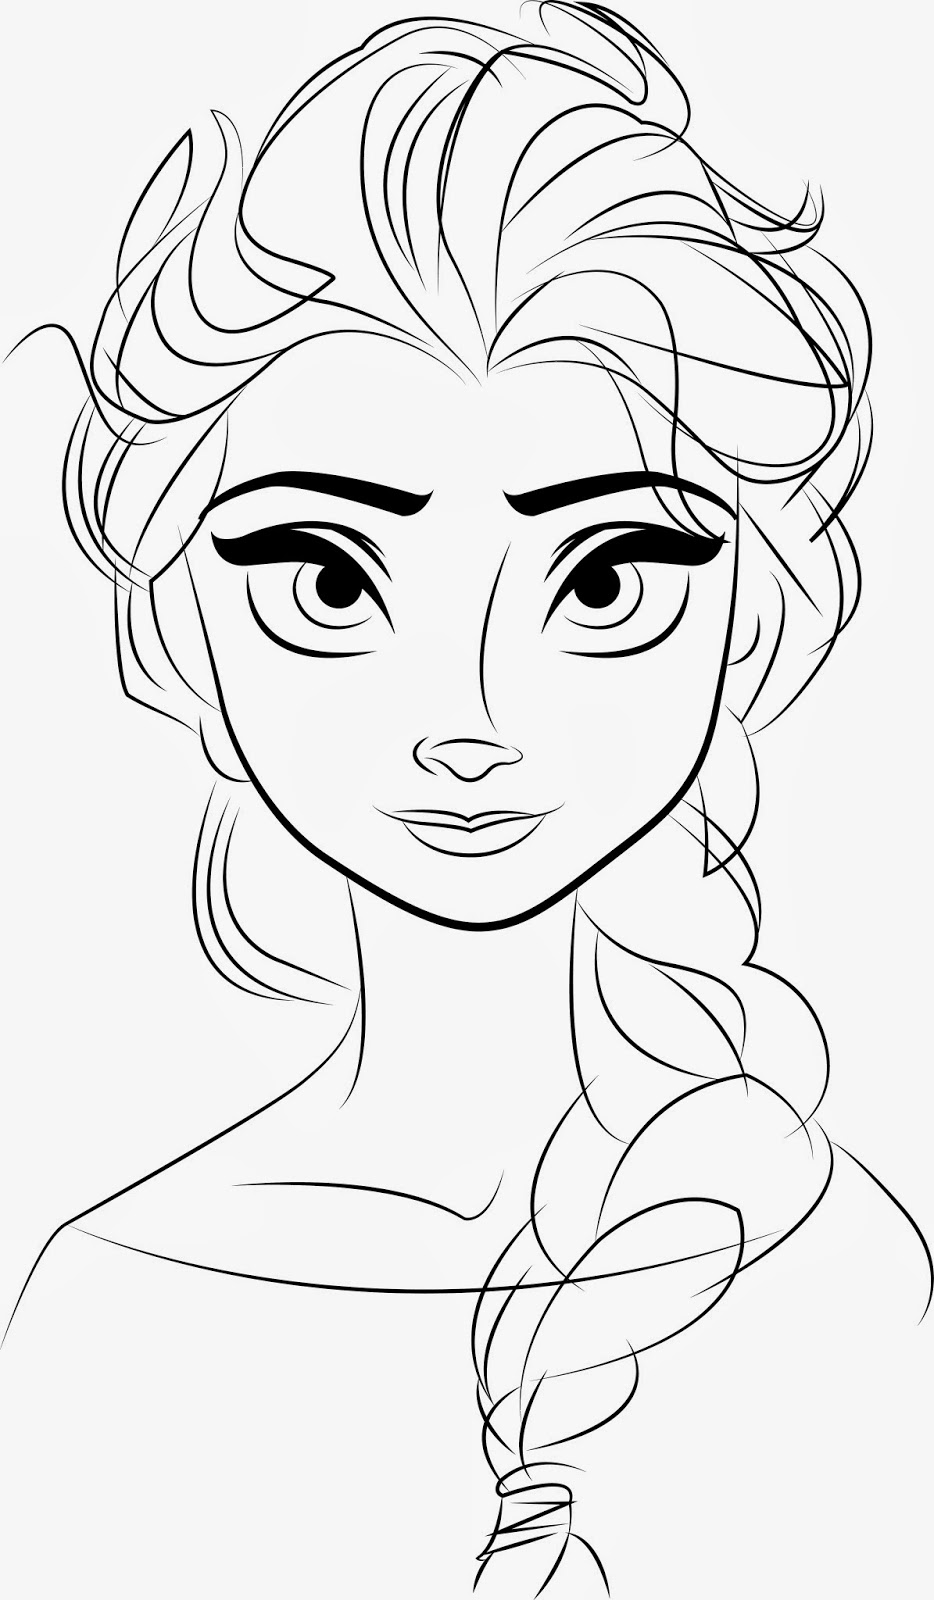 elsa-free-printable-coloring-pages-templates-printable-download